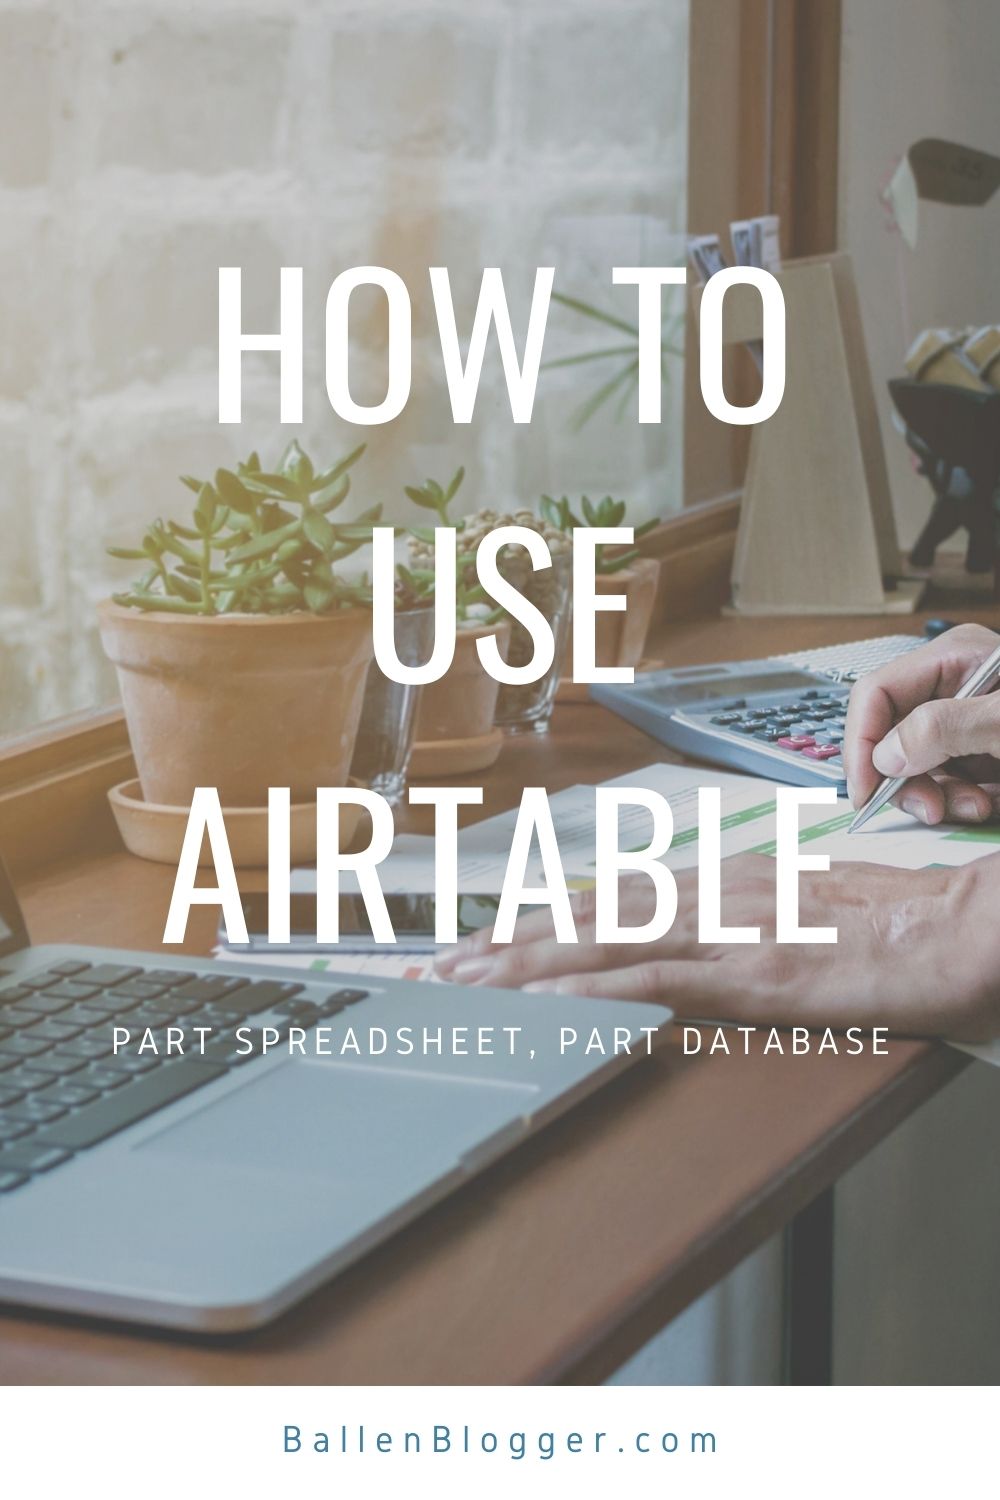 Airtable, founded in 2012, is a cloud collaboration tool. It combines many of the features of an extensive database with the format of a spreadsheet. 